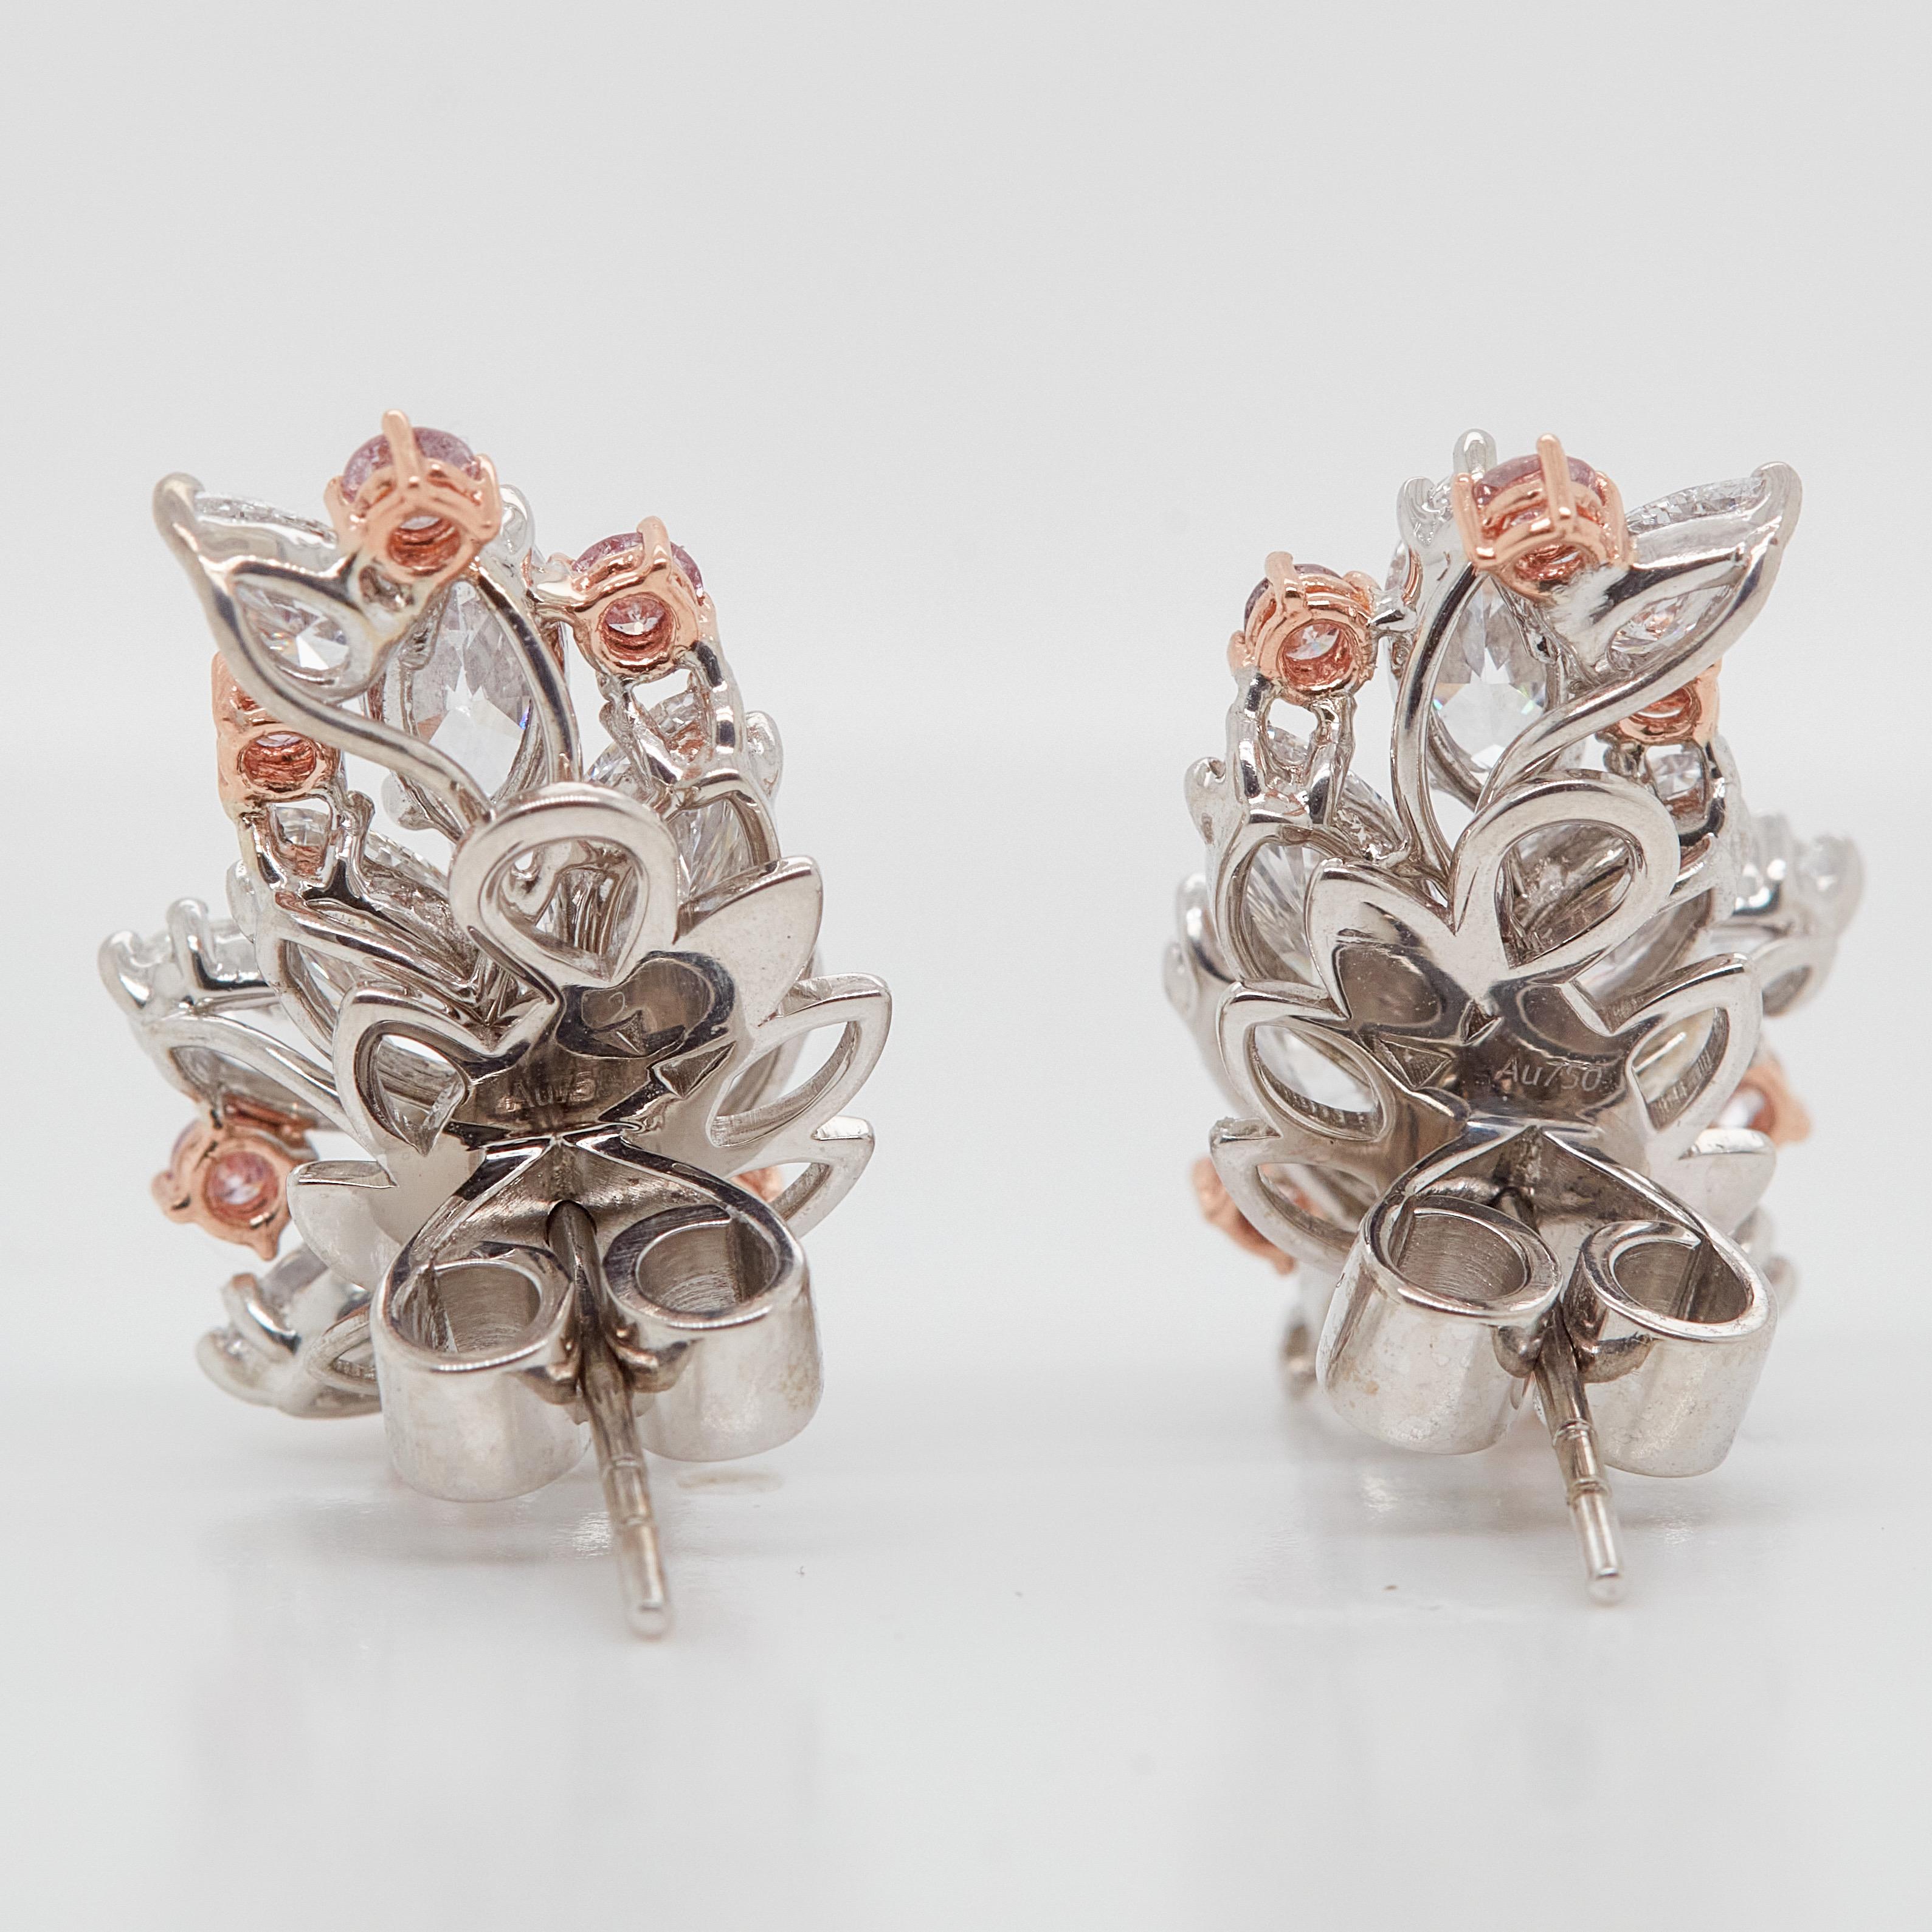 Modern 6.07 Carat Pink Diamond and White Diamond Cluster Earrings For Sale